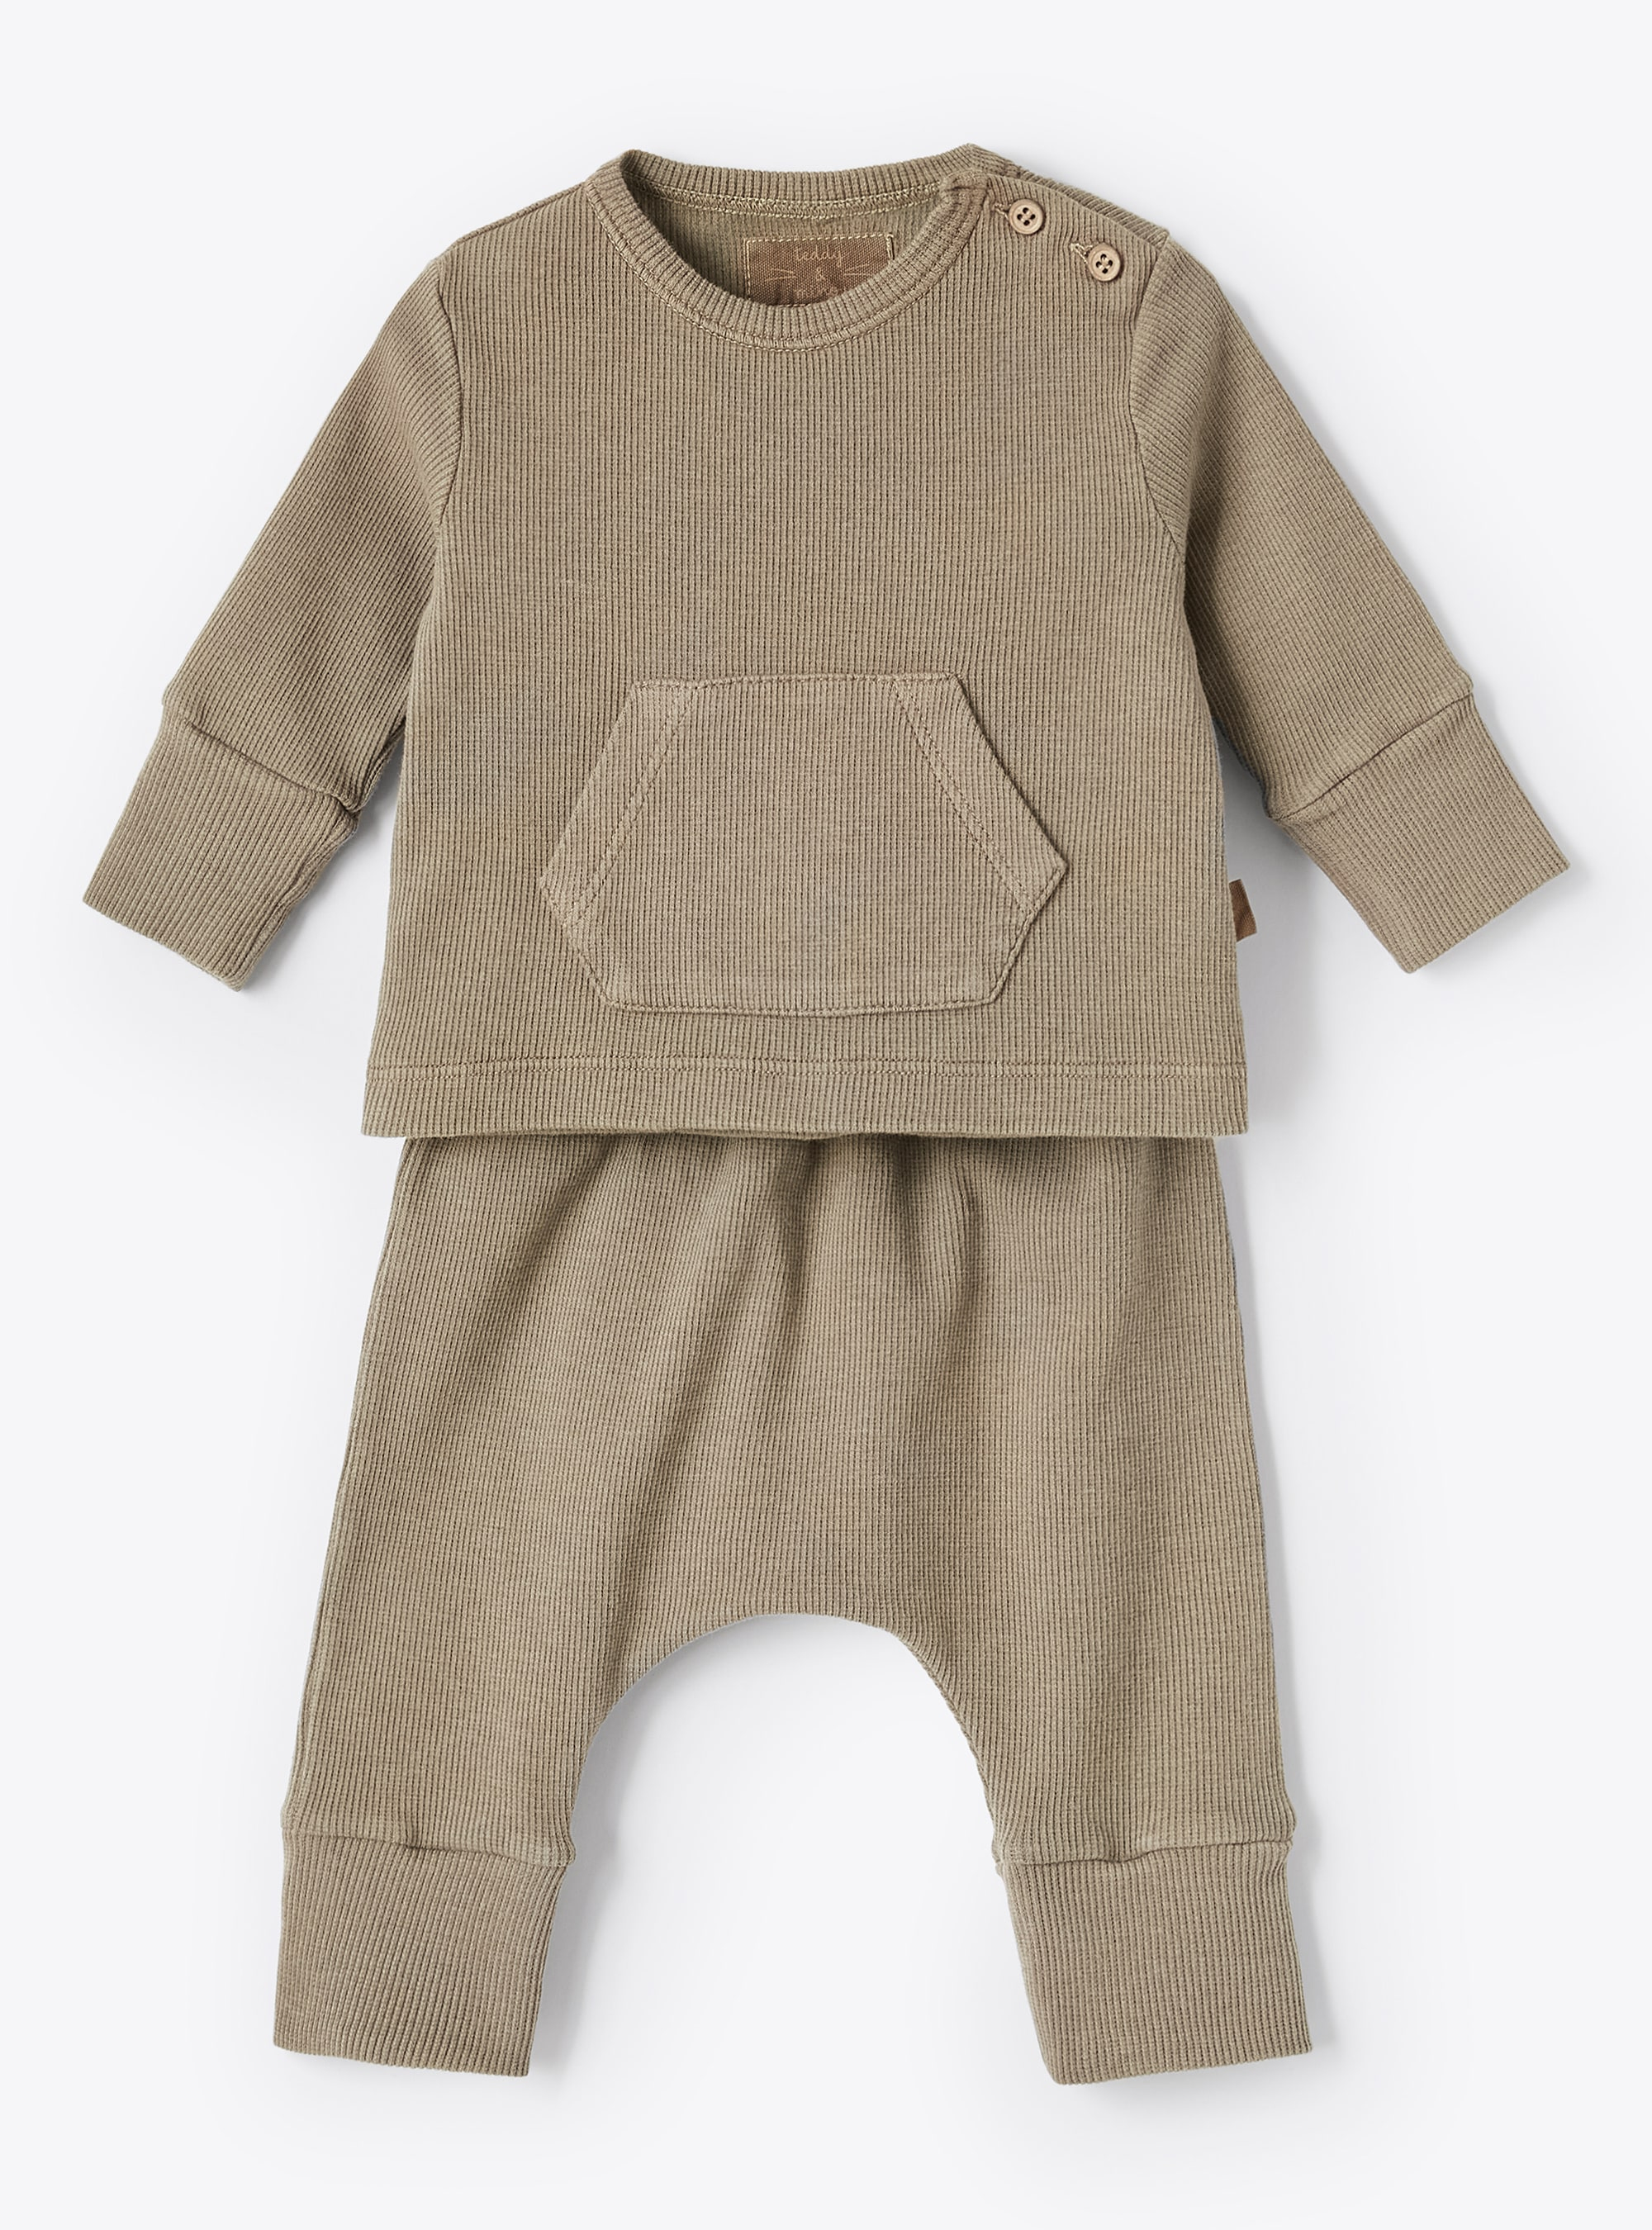 Brown ribbed cotton outfit - Two-piece sets - Il Gufo